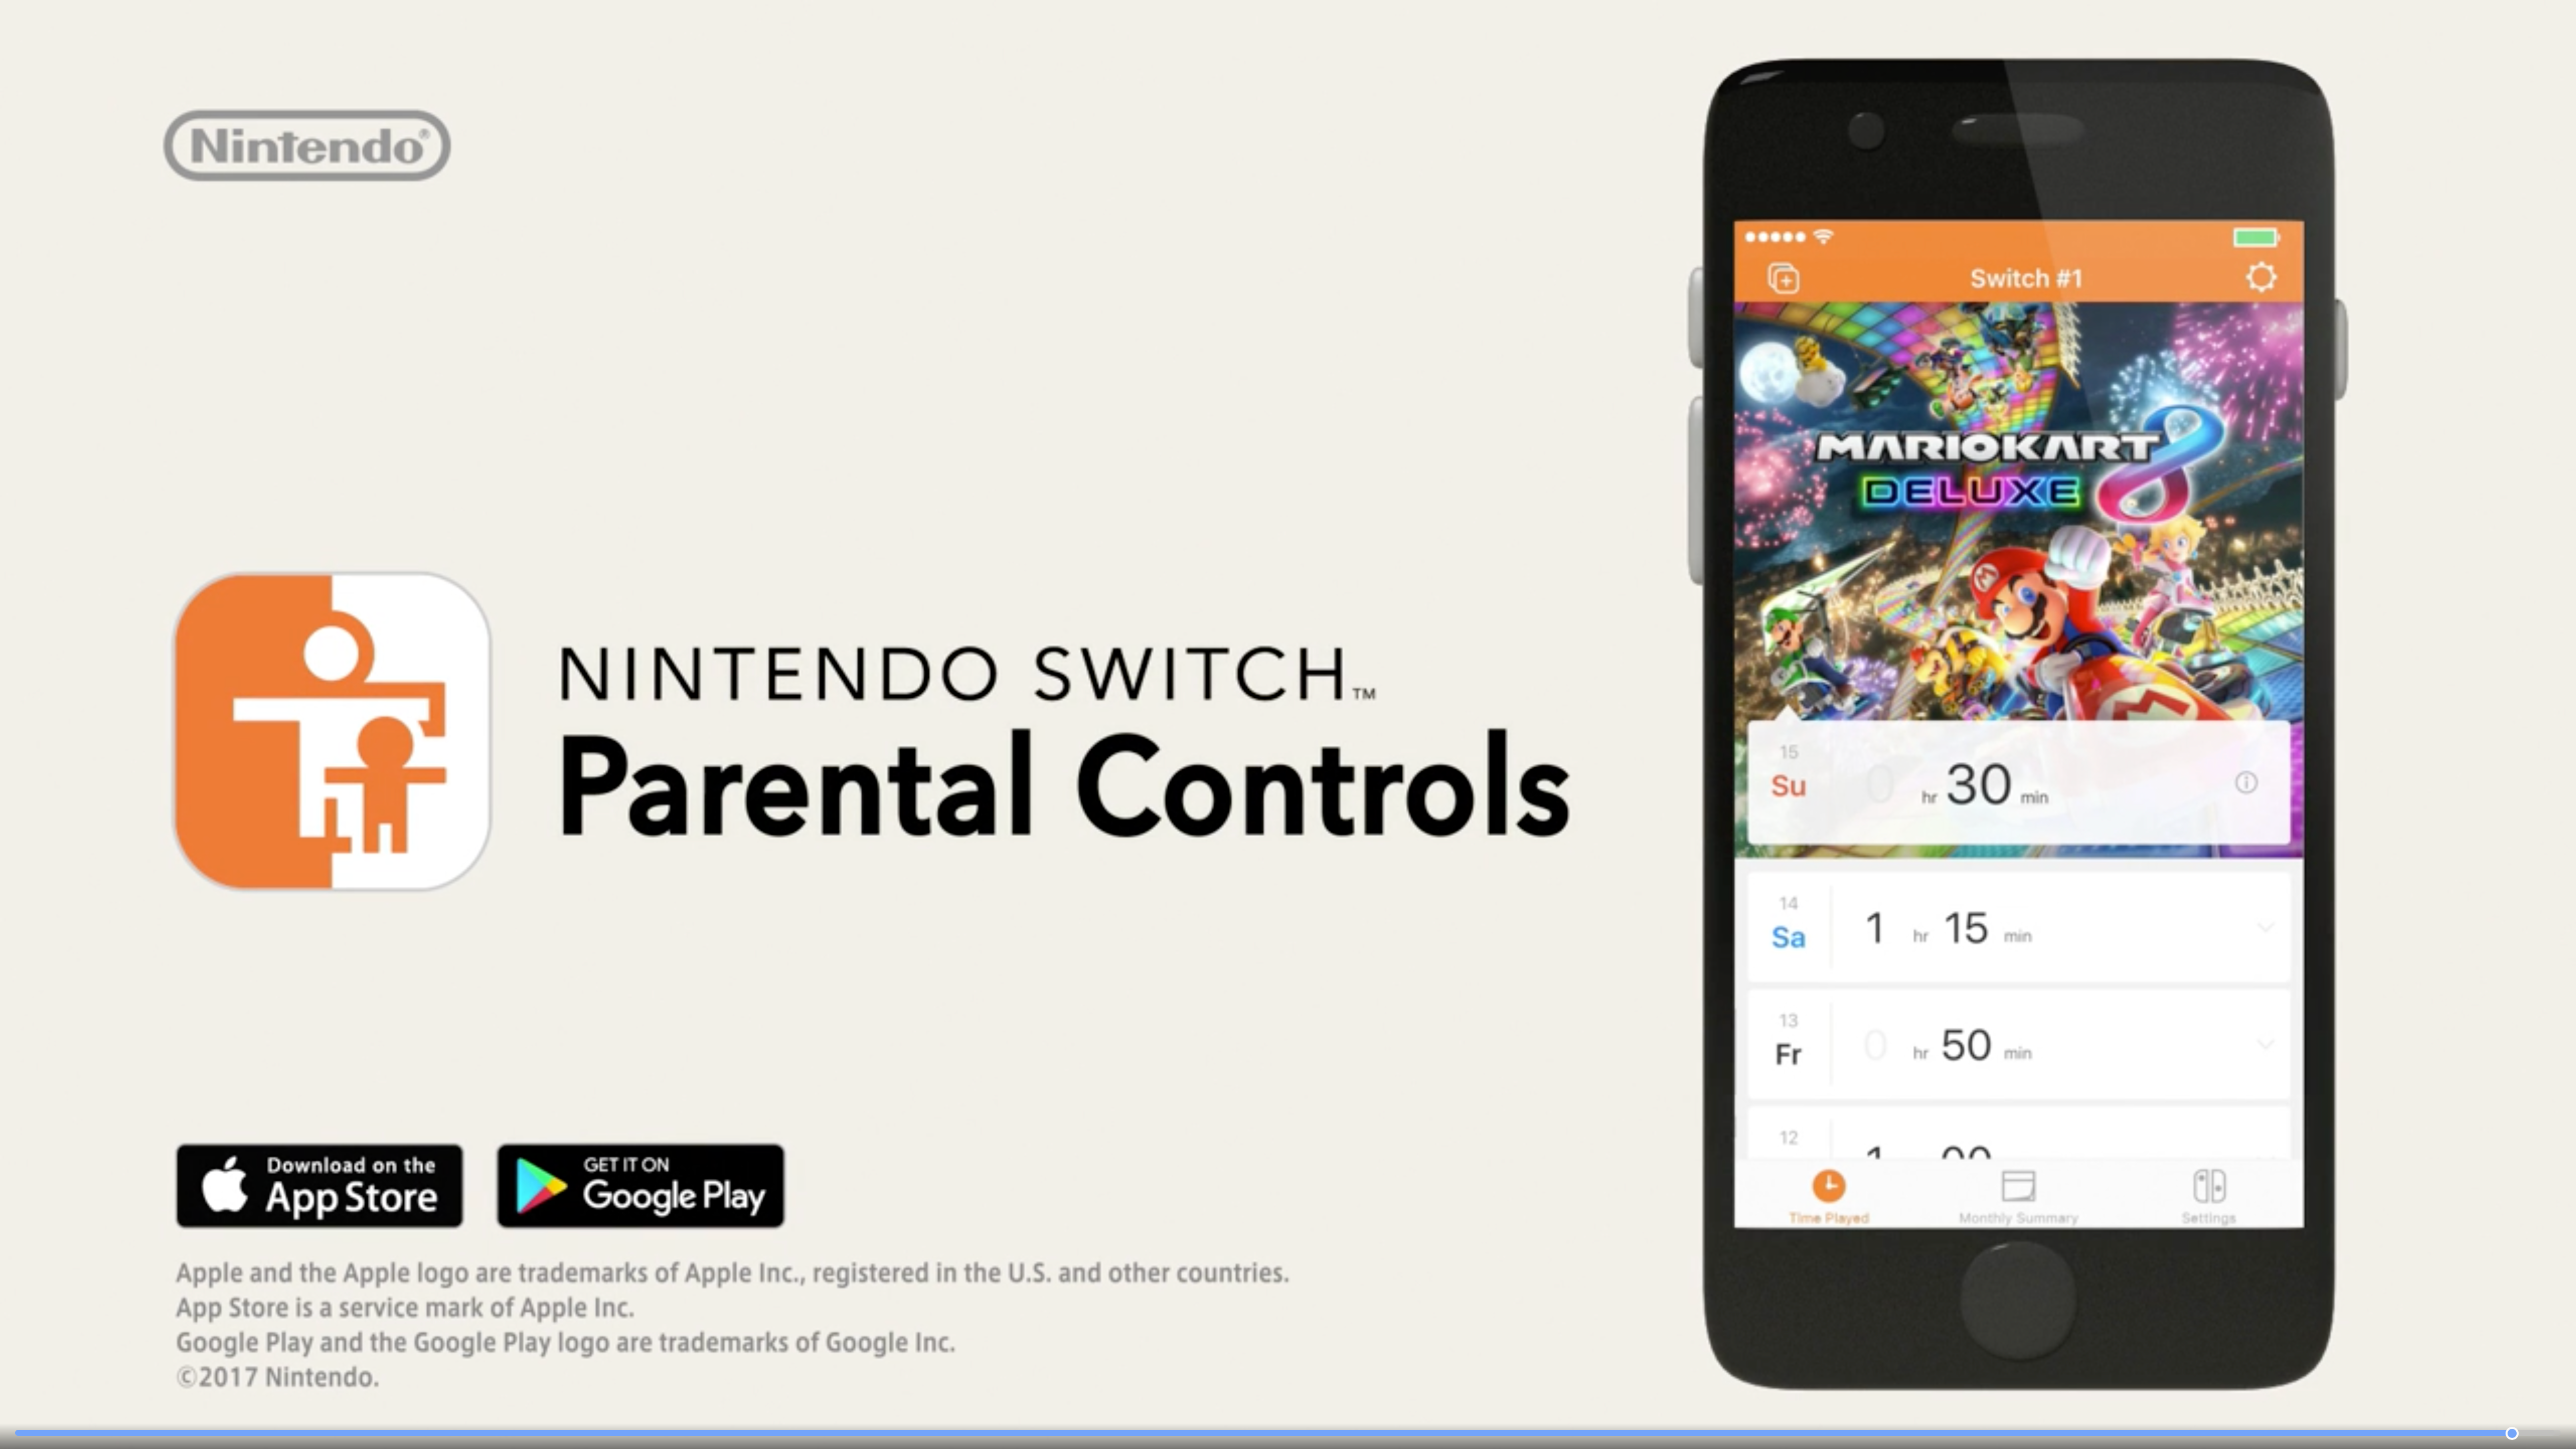 Nintendo's new Switch gaming console will allow for remote parental controls via a smartphone app